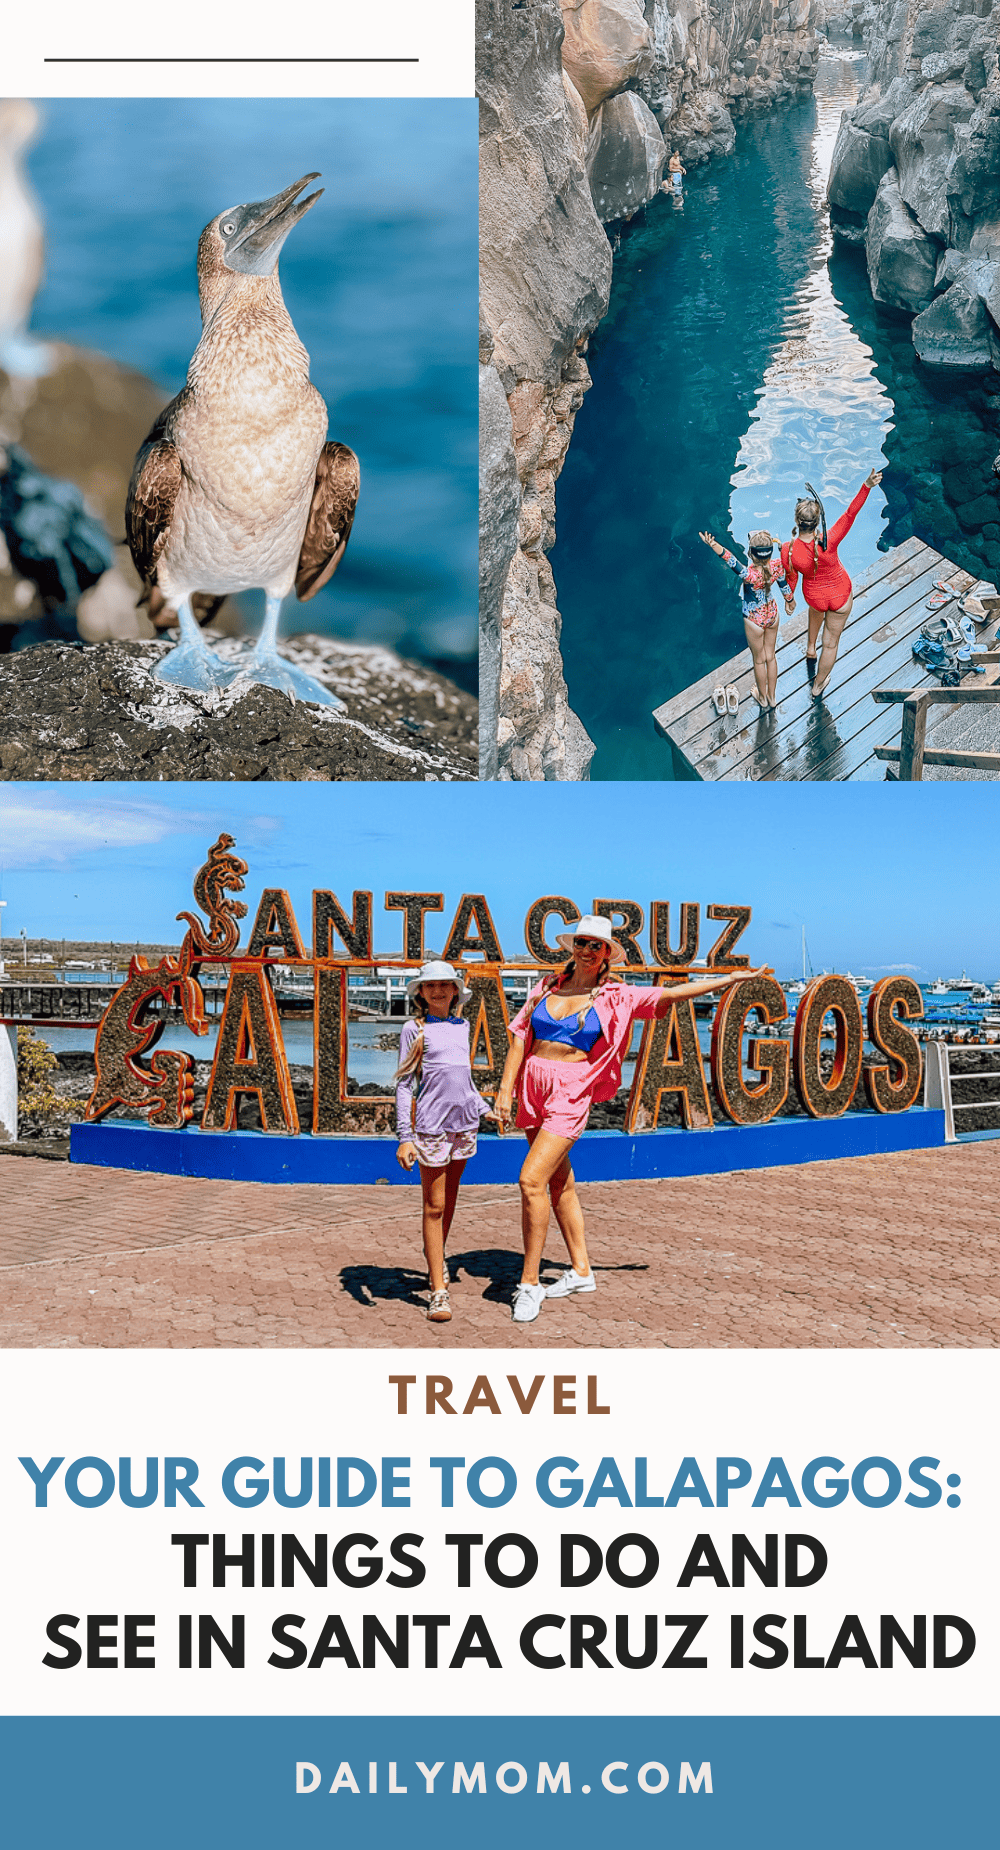 Your Guide To The Galapagos Islands: Top Things To Do And See In Puerto Ayora, Santa Cruz Island 77 Daily Mom, Magazine For Families